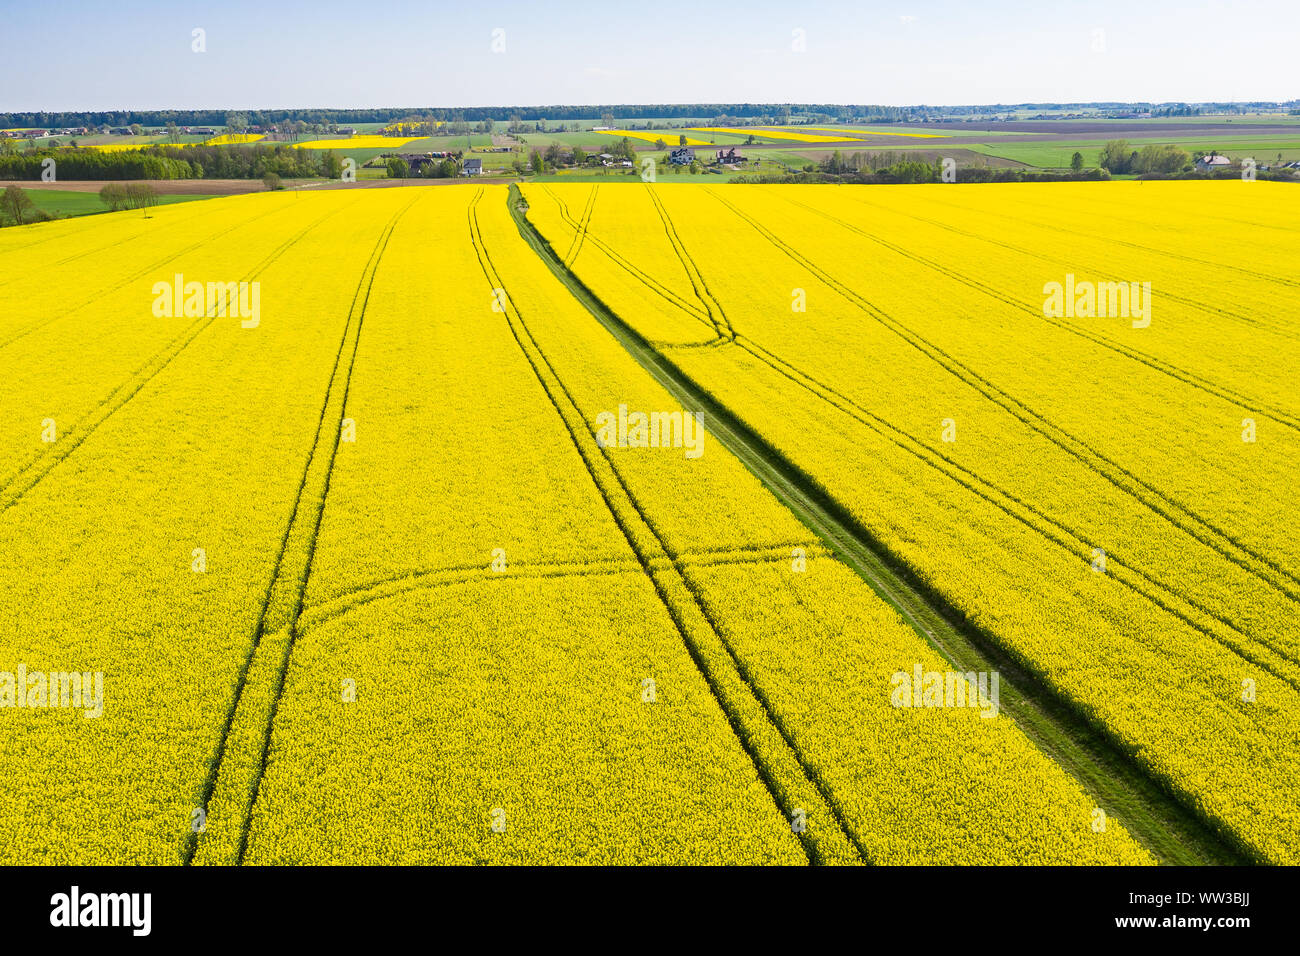 rapeseed field seen from above - yellow flowers Stock Photo